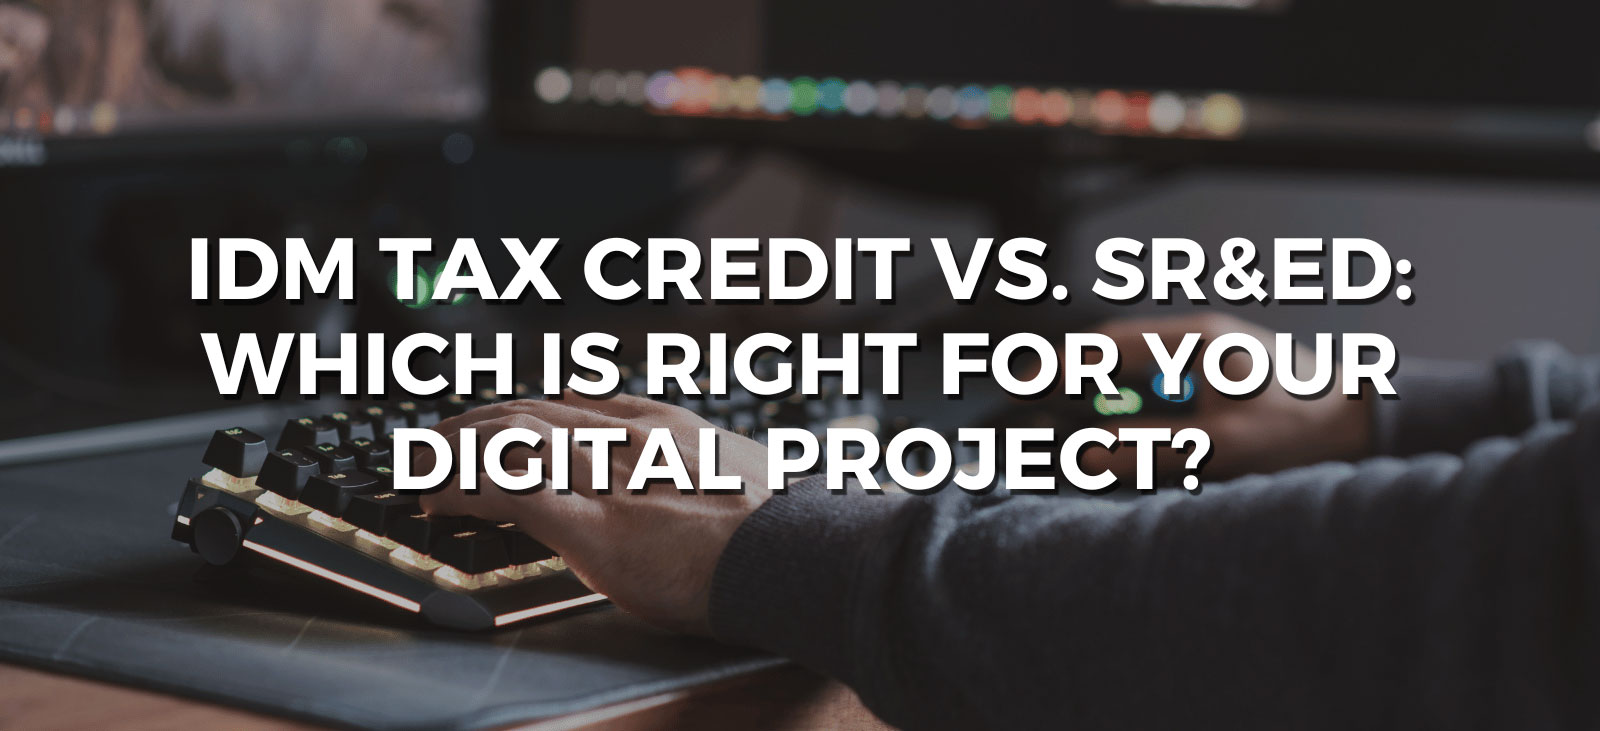 IDM Tax Credit VS SR&ED: Which is right for your digital project?